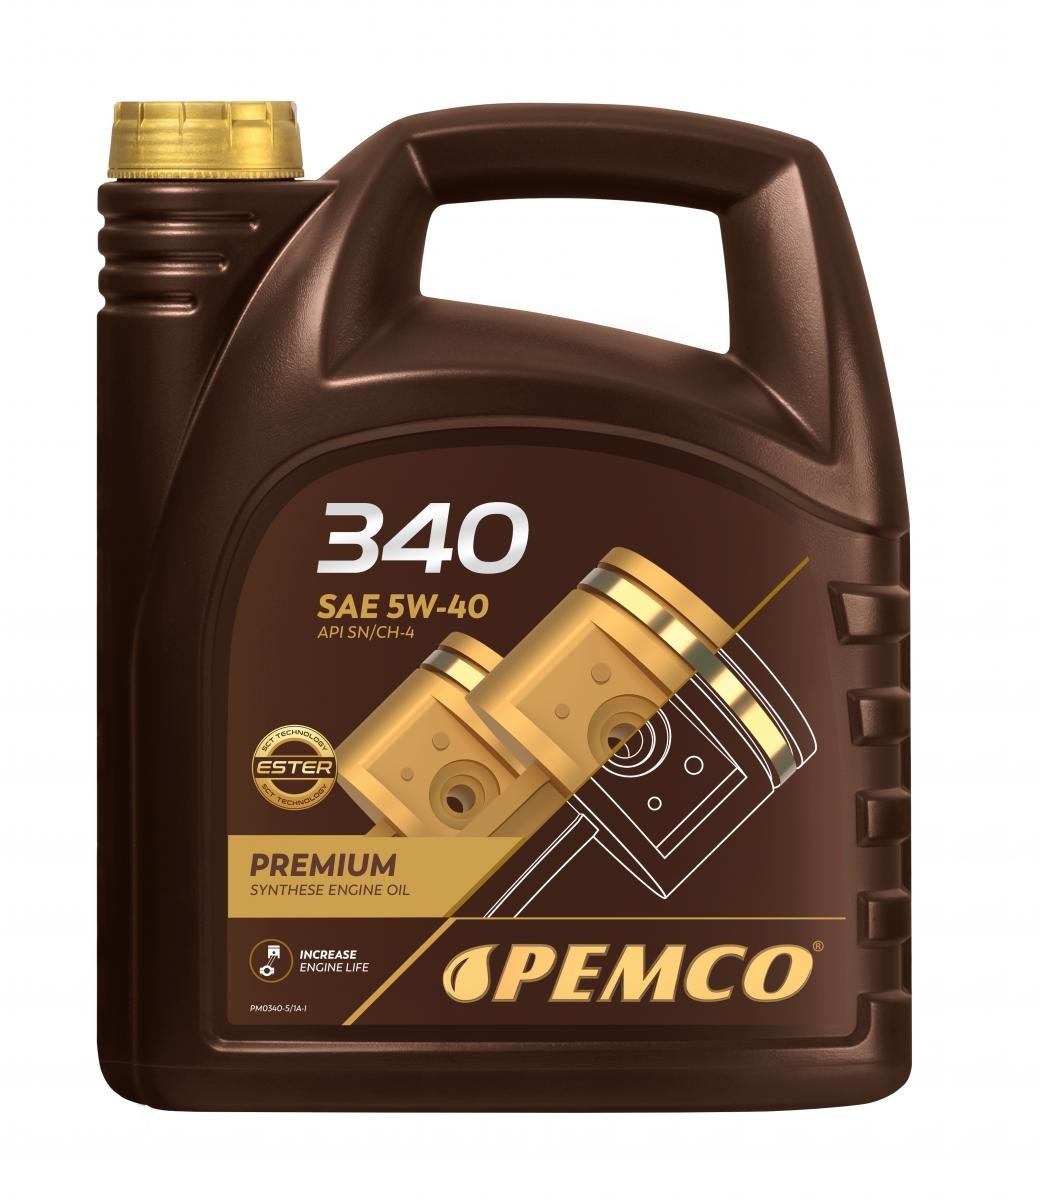 Engine oil PEMCO 5W-40, 5l, Synthetic Oil longlife PM0340-5